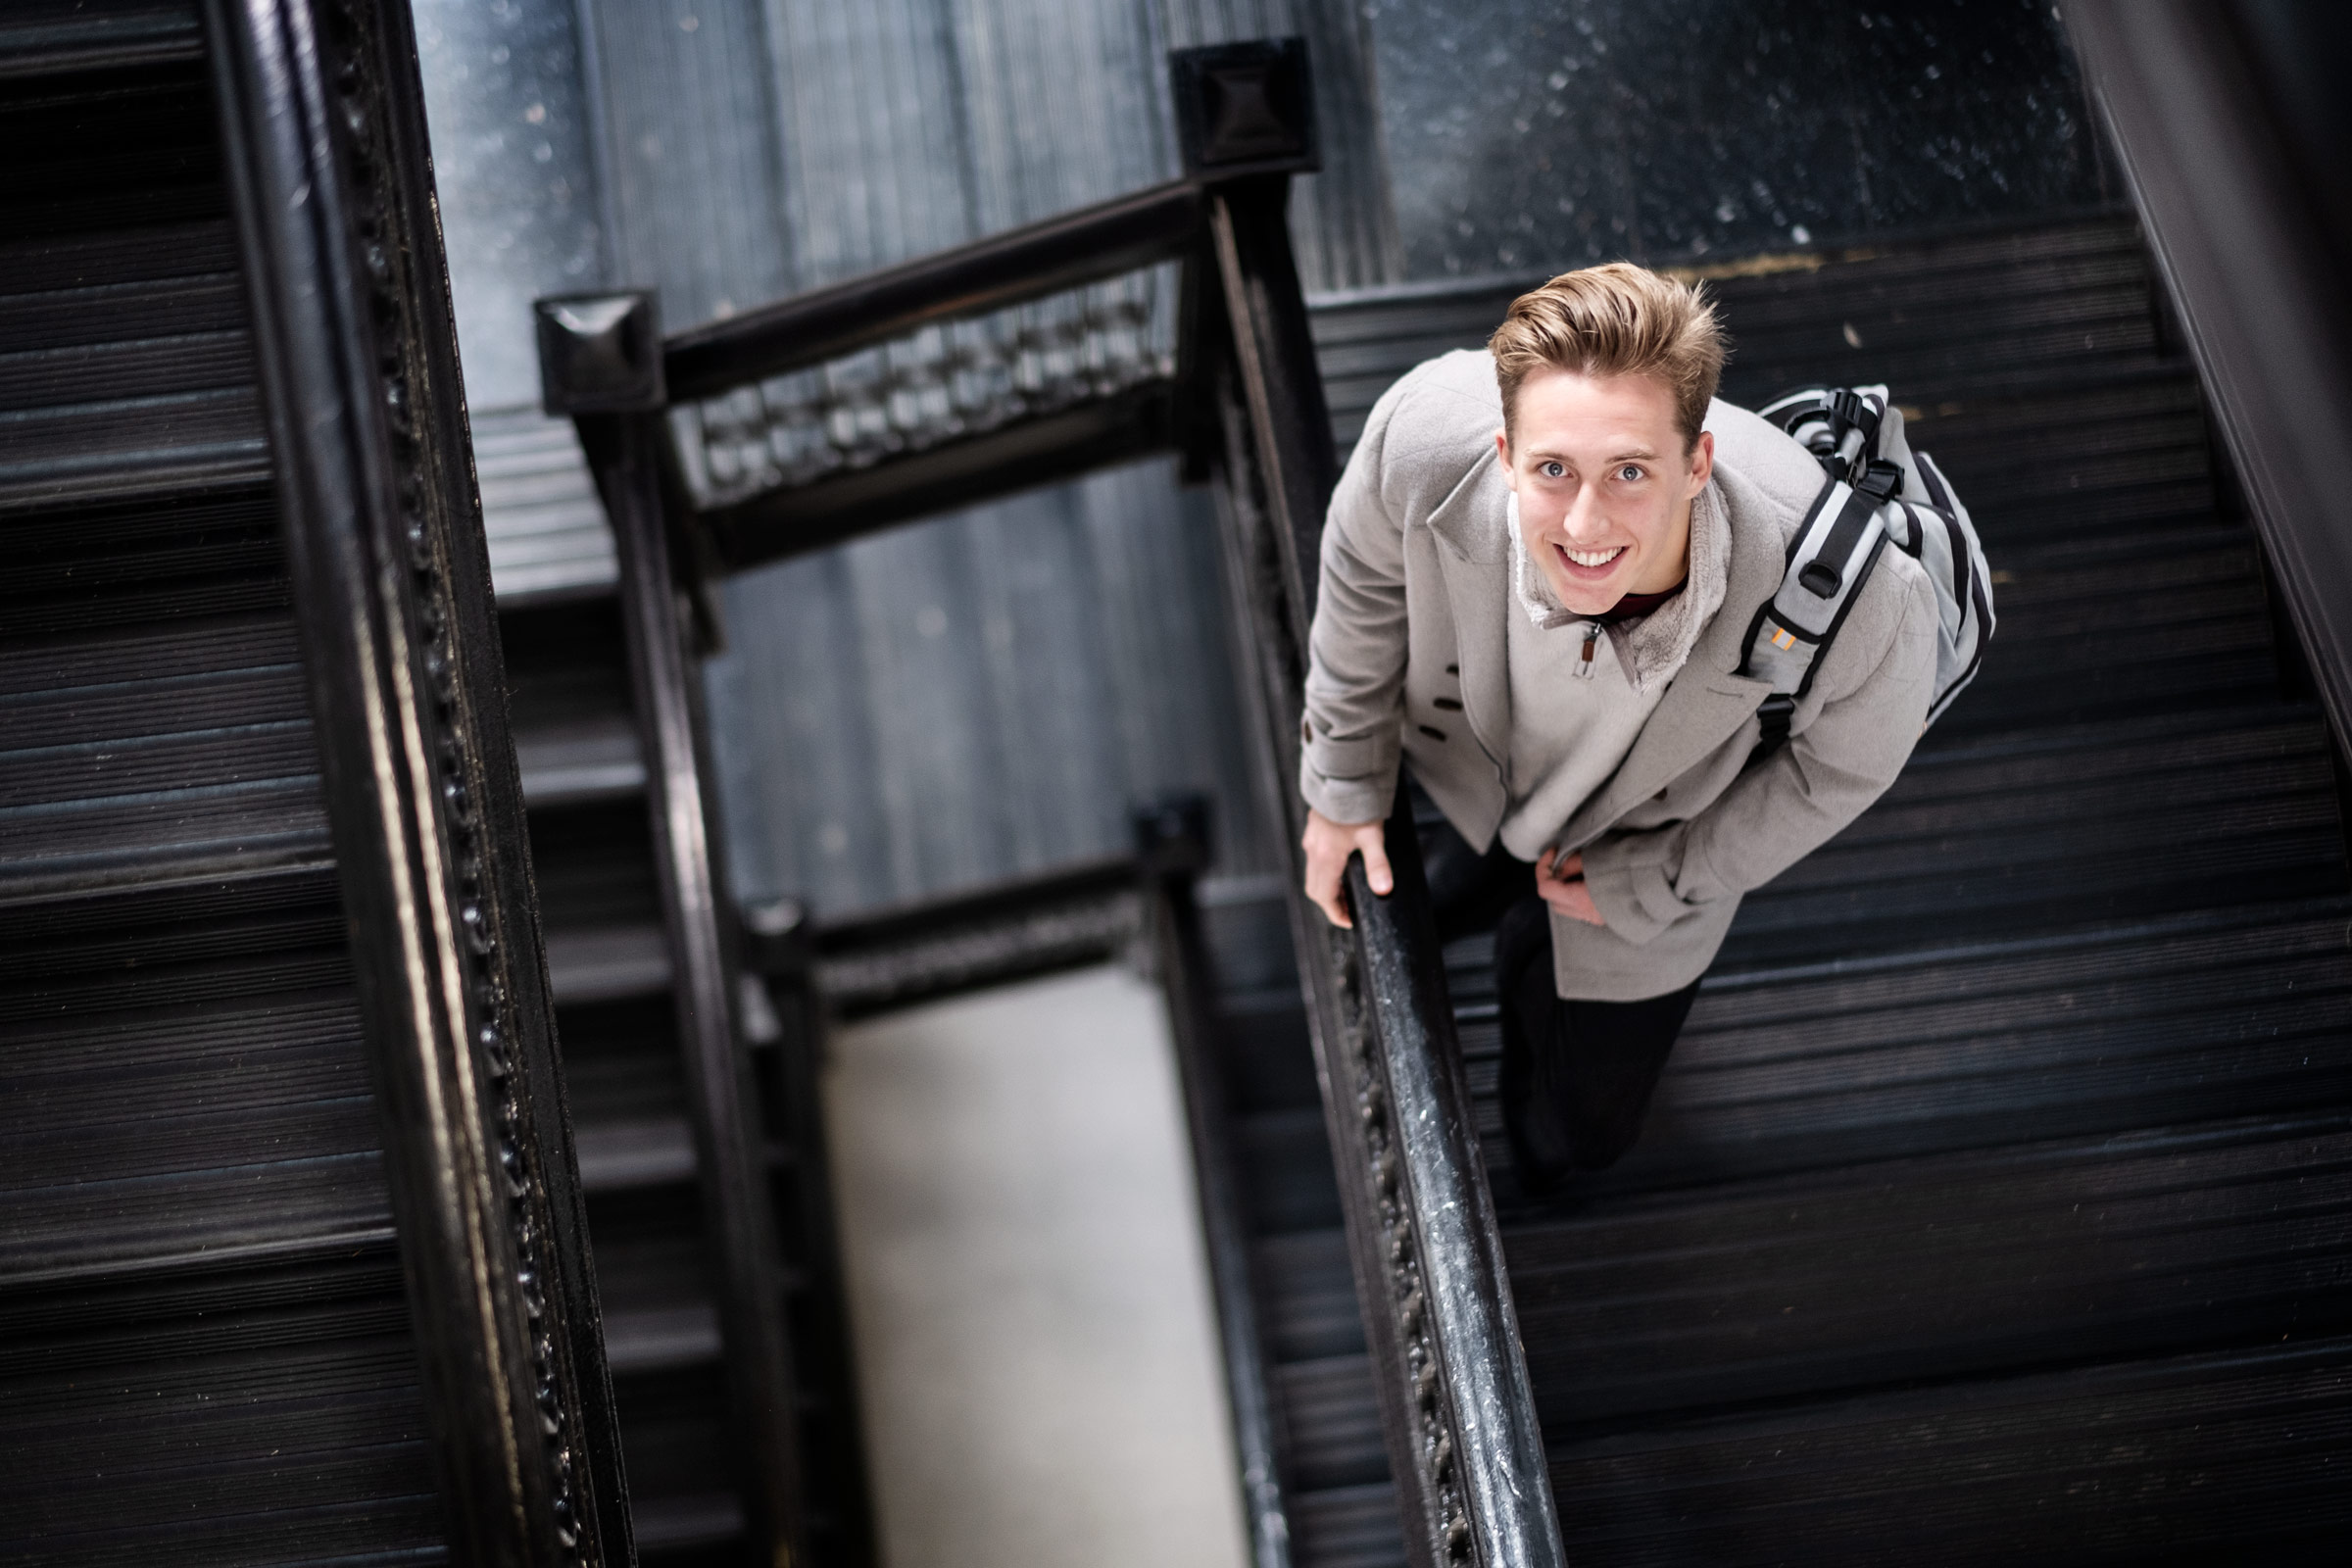 Phillipe Shicker, pictured on a staircase holding a backpack.